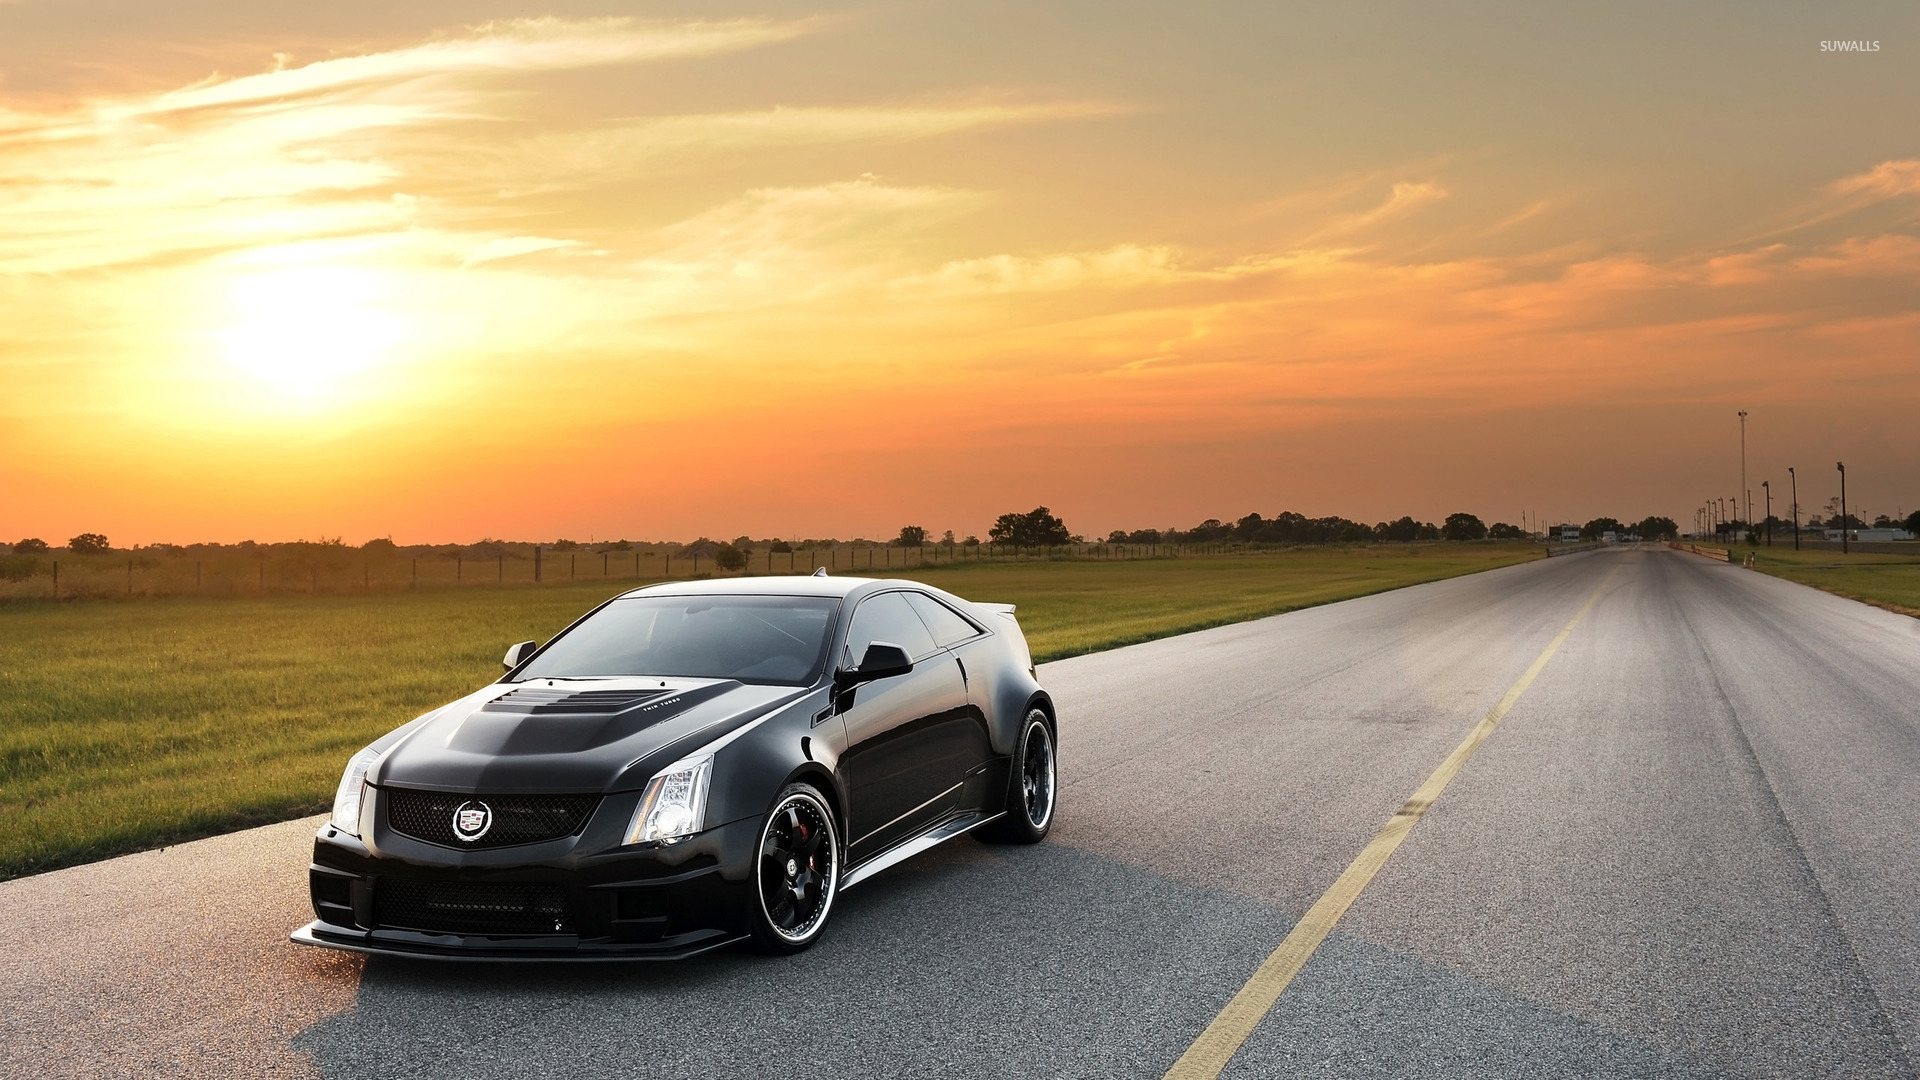 Hennessey Cadillac Cts V Wallpaper Car